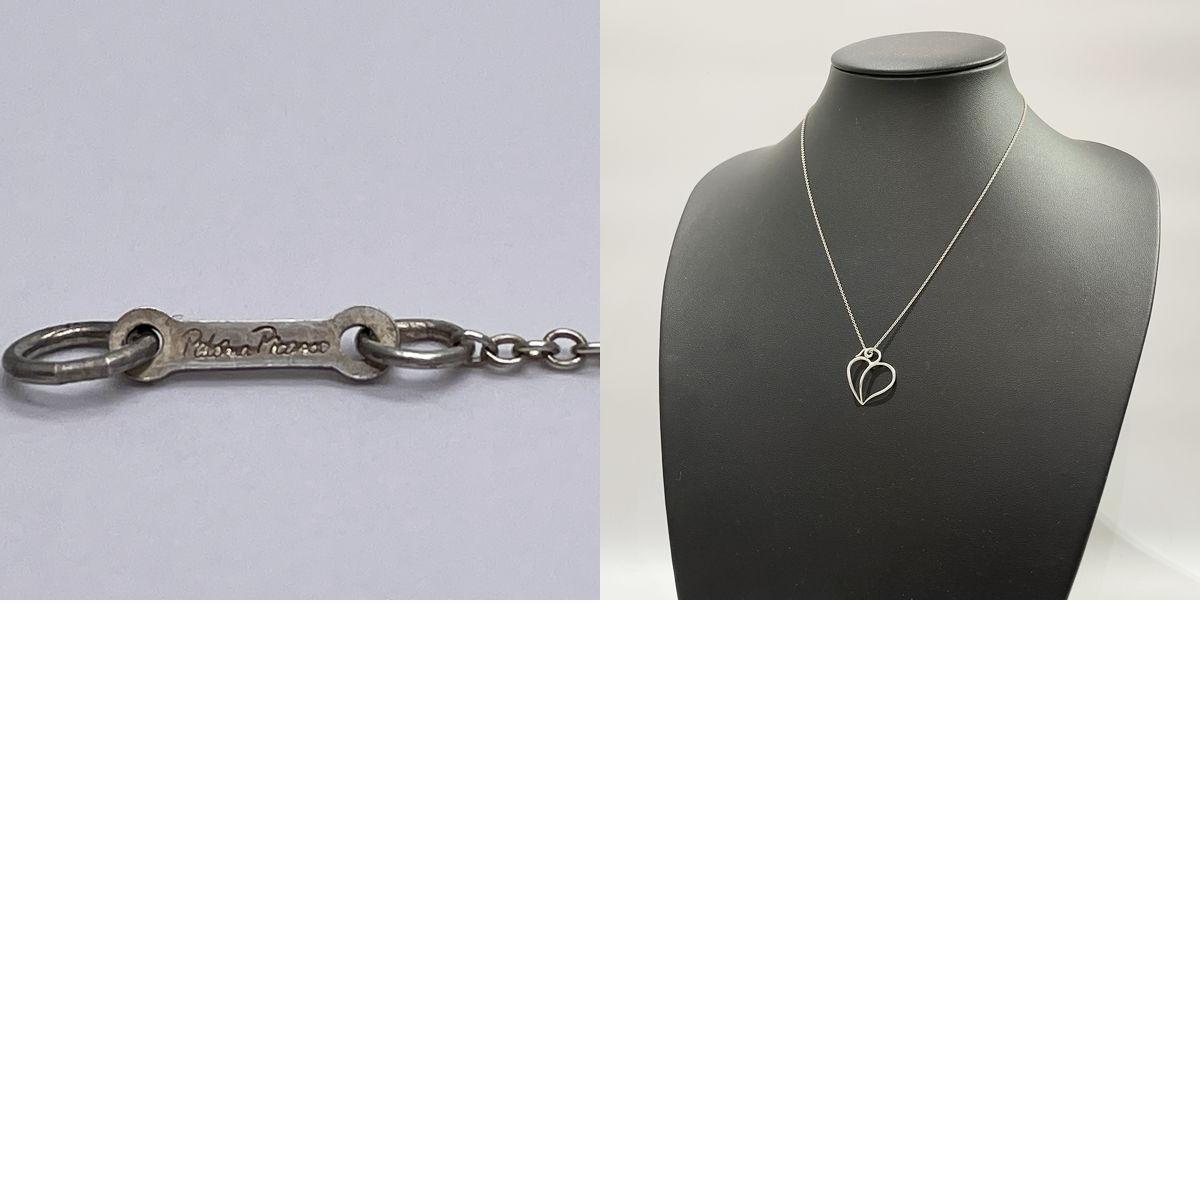  used B/ standard Tiffany paroma Picasso Apple Heart leaf silver 925 lady's necklace 20438495